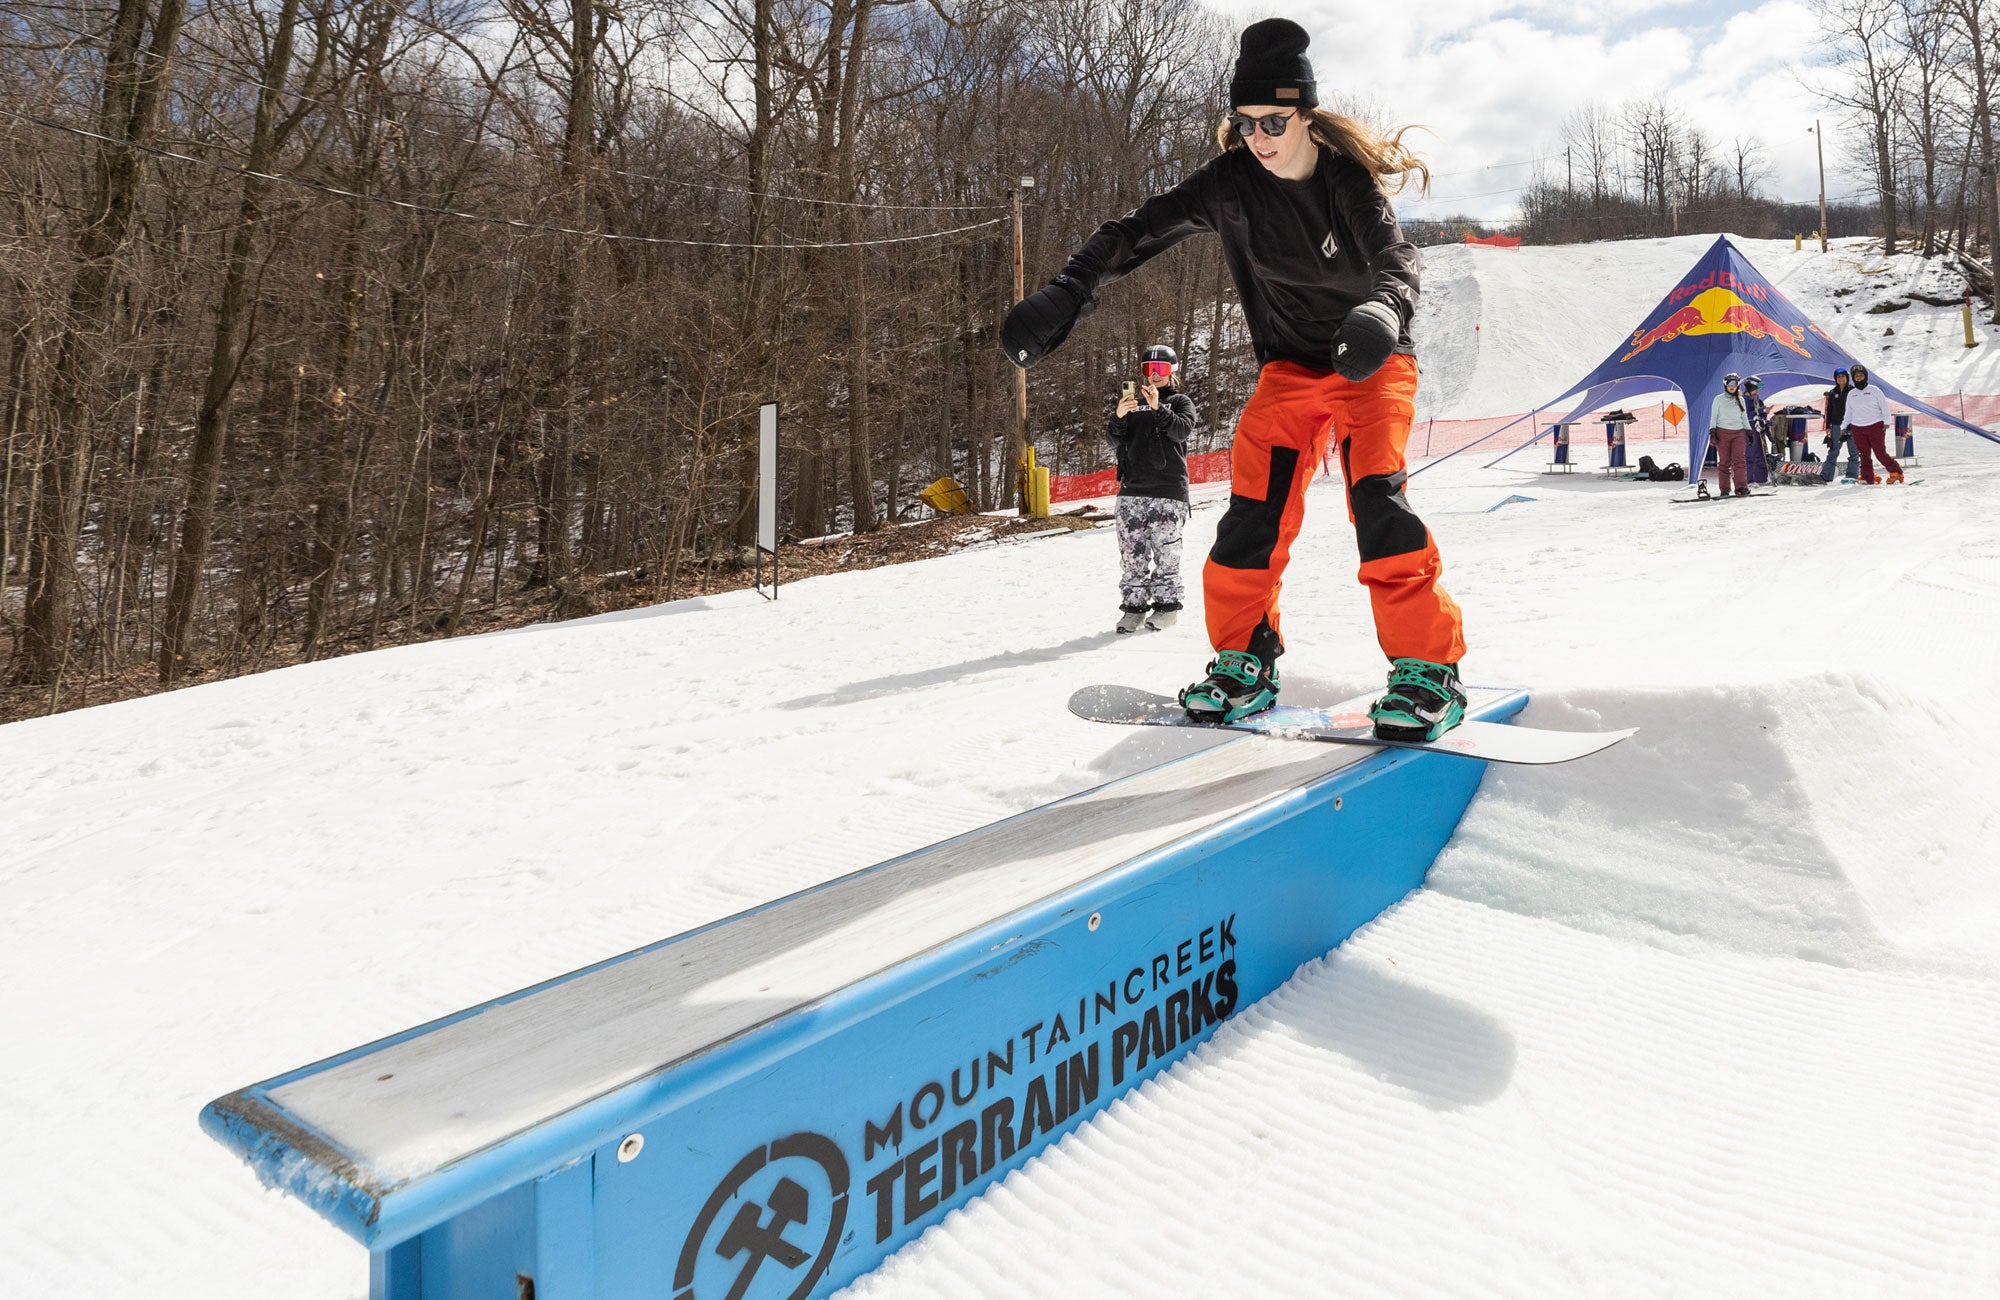 Snowboard Mag: BTBounds at Mountain Creek: Jess Tennyson Talks Riding in Jersey for the First Time